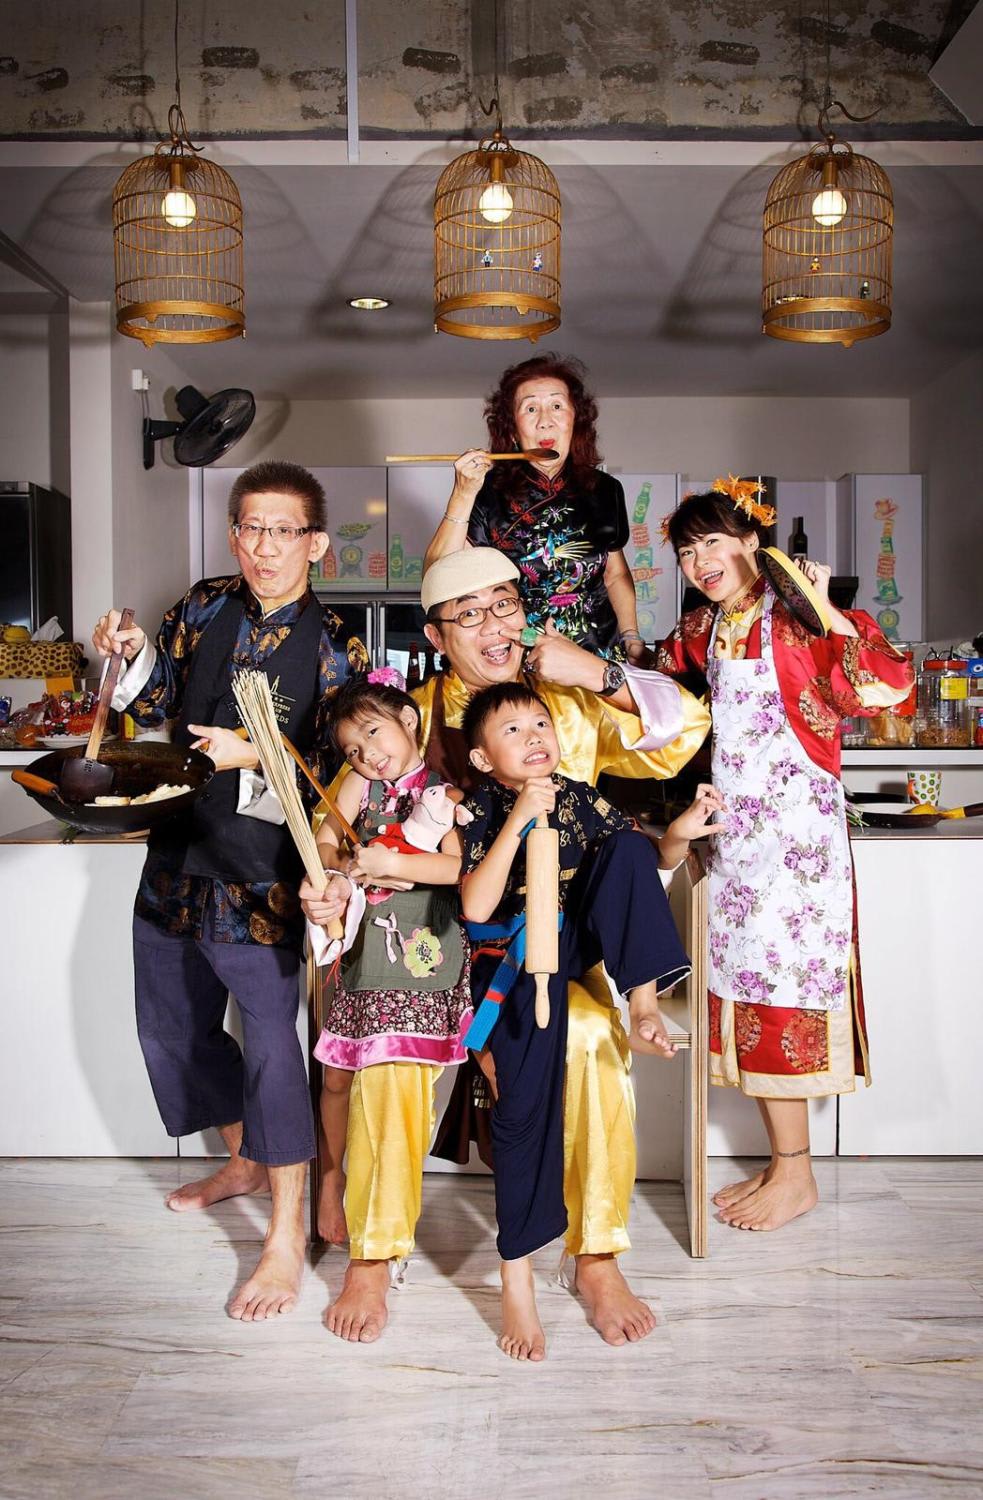 Mr Calvin Soh (centre) with his wife Arlette Tan-Soh (far right), their two children Ava and Dylan, Mr Soh's brother Adrian (far left) and mother Ng Swee Hiah (back row) during Chinese New Year in 2012&nbsp;— the year Mr Soh decided to change his parenting style.